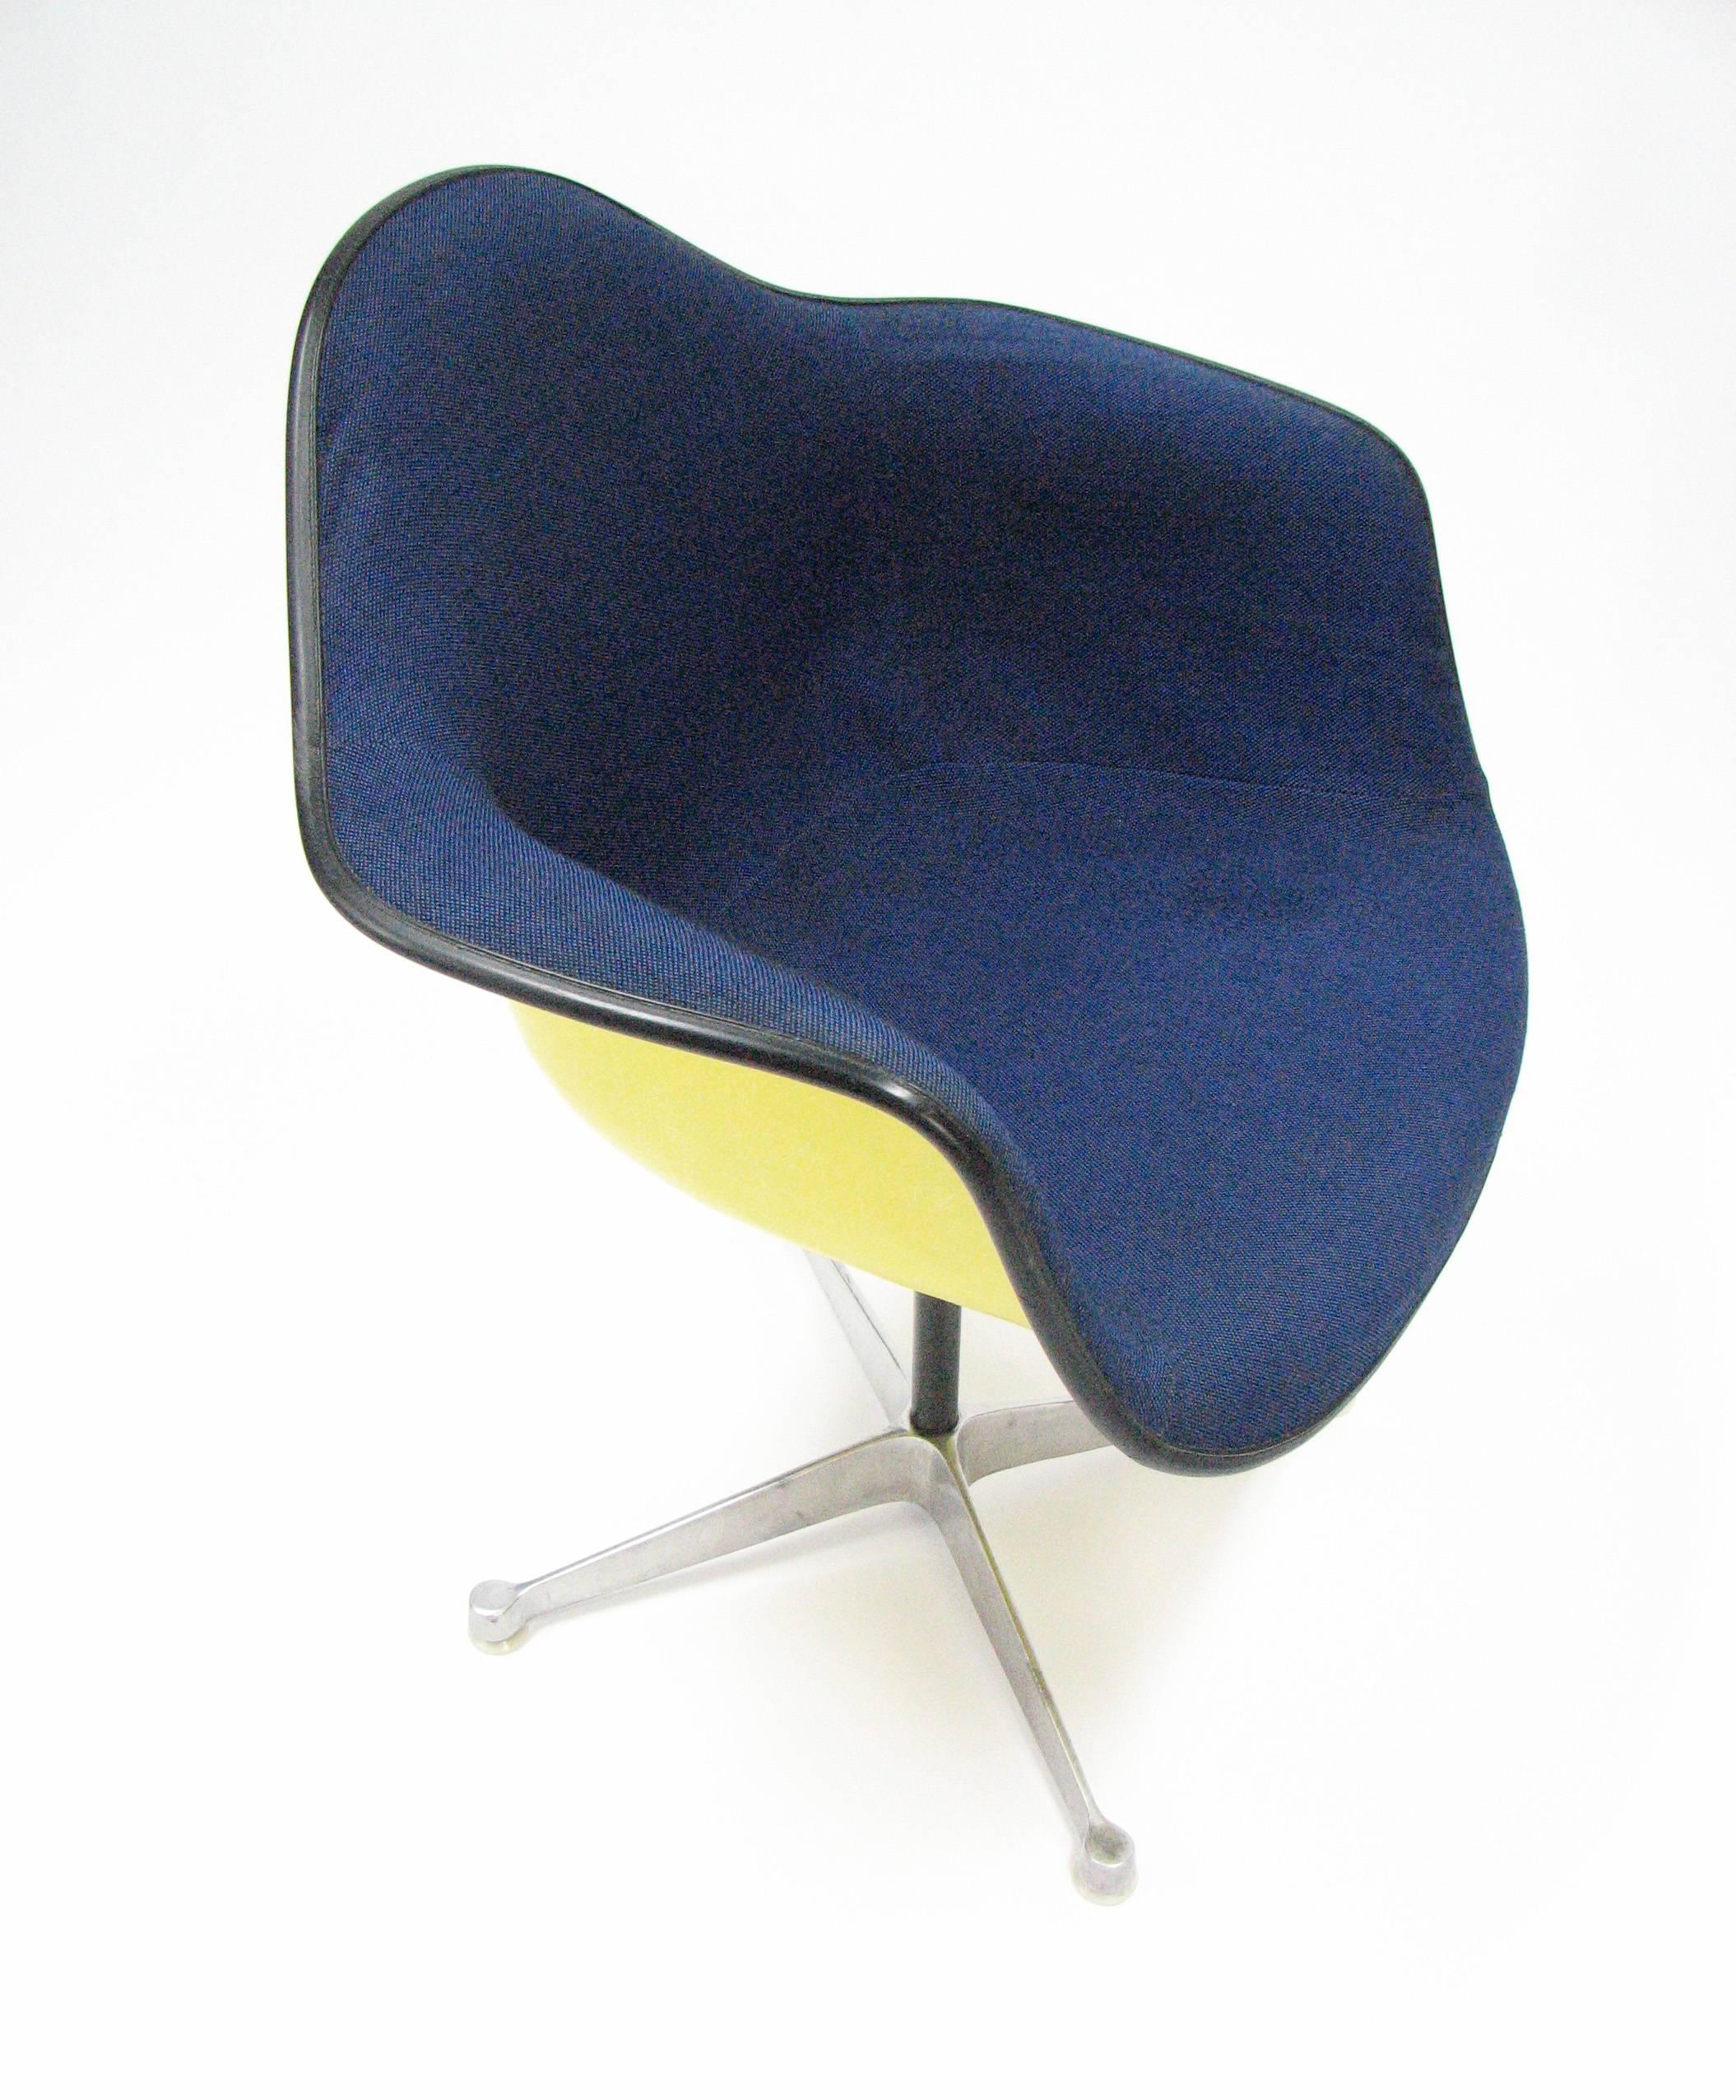 20th Century Iconic Mid-Century Upholstered Eames PAC Fiberglass Chair for Herman Miller